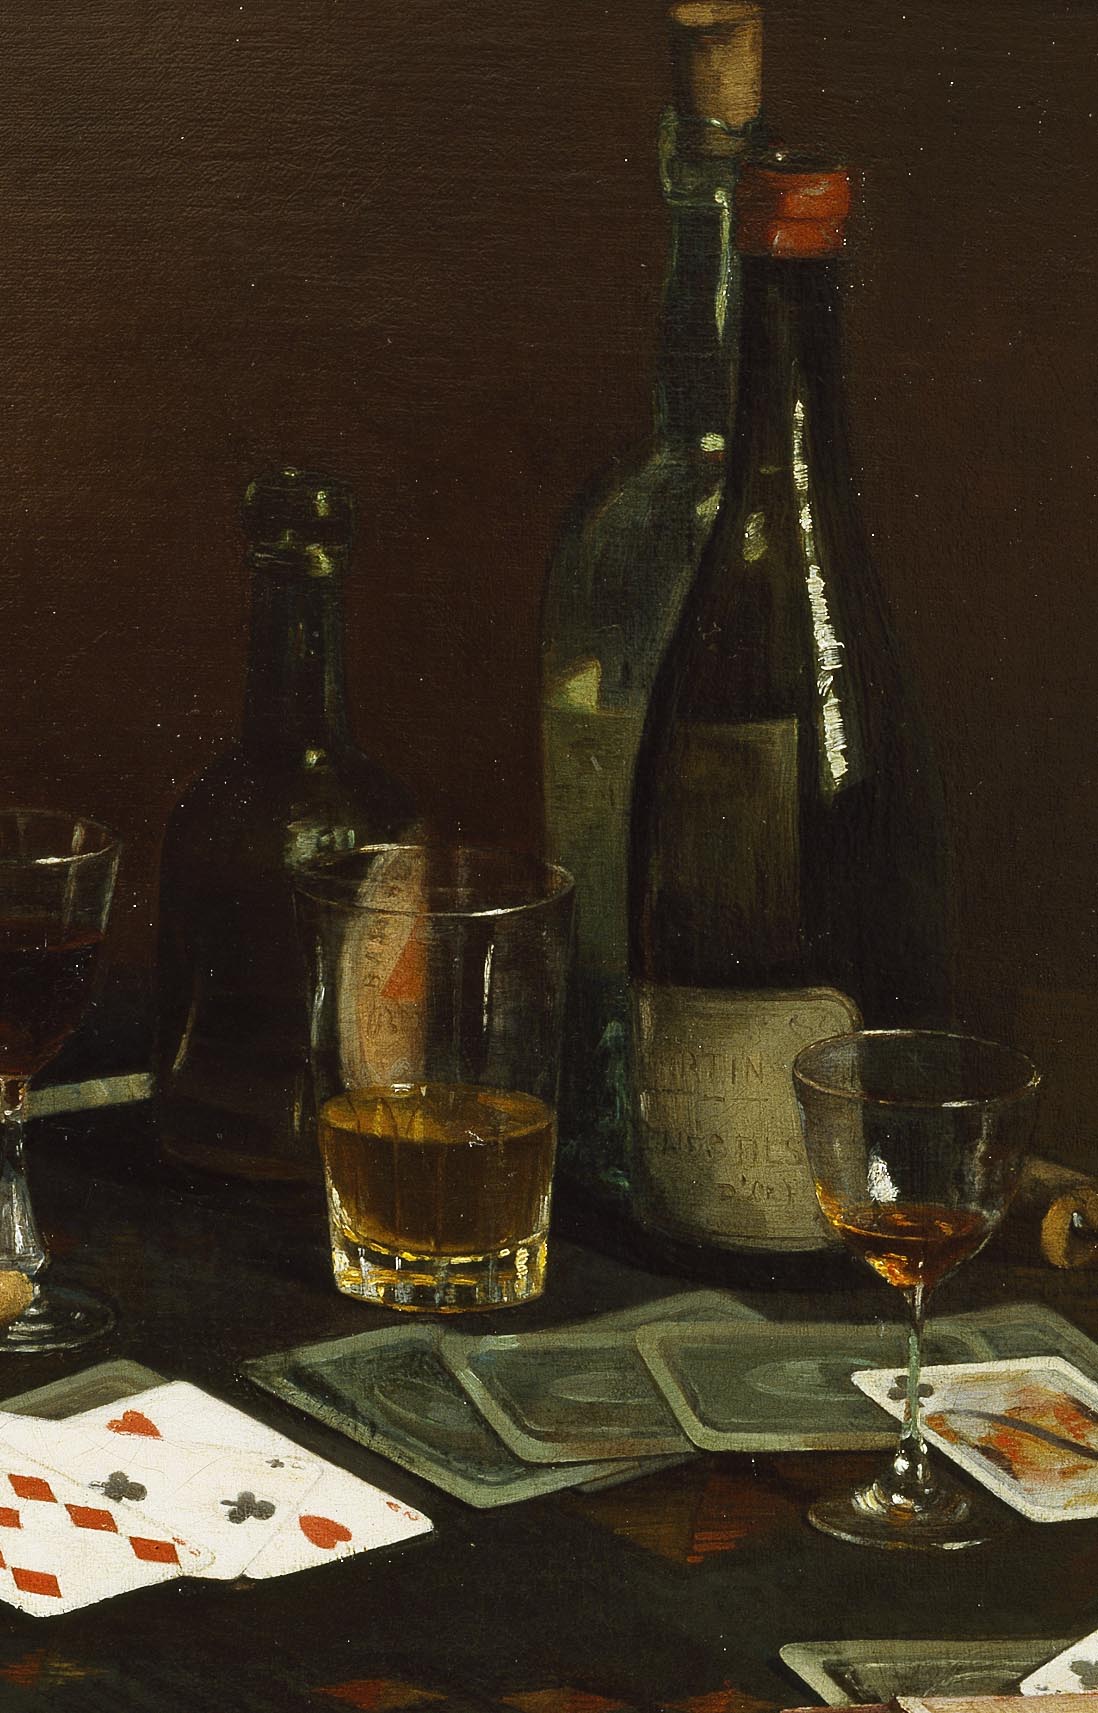 A dark-colored painting's detail featuring three alcohol bottles and three glasses half-full with alcohol on a table. There are a few playing cards facing down or up on the table.